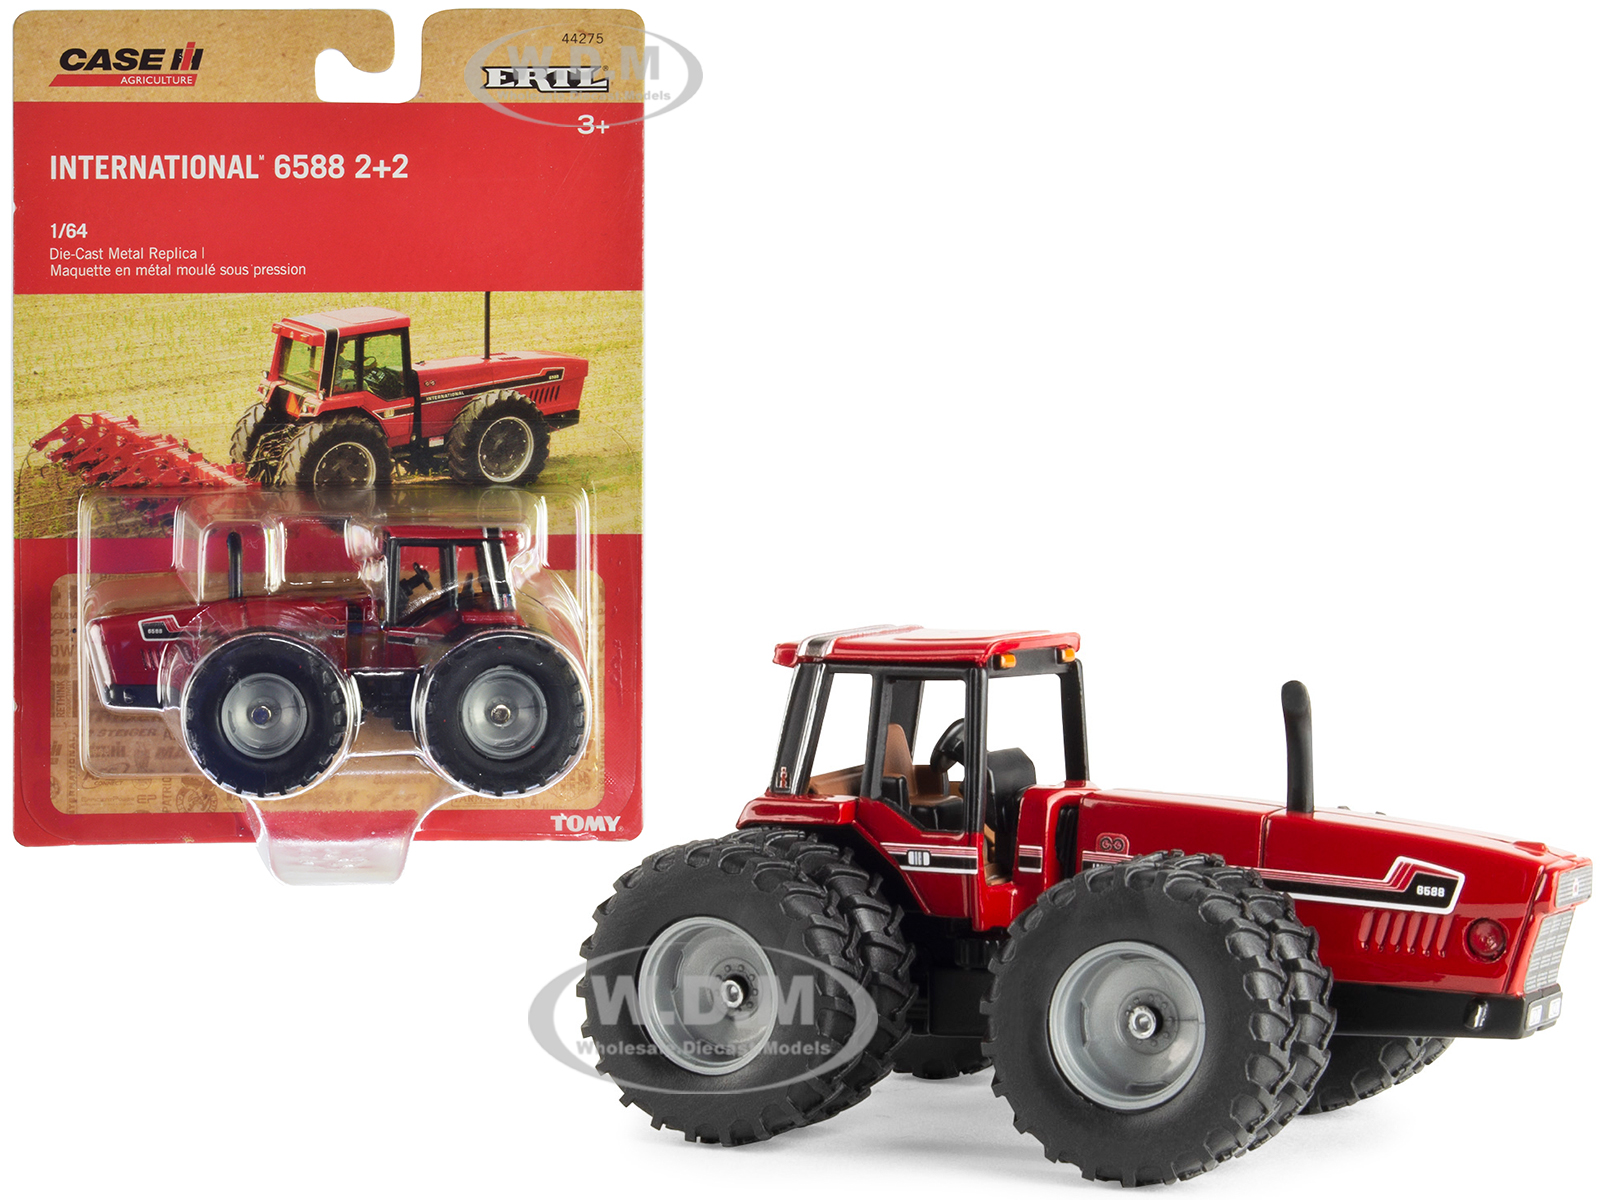 International Harvester 6588 22 Tractor Red Case IH Agriculture Series 1/64 Diecast Model By ERTL TOMY